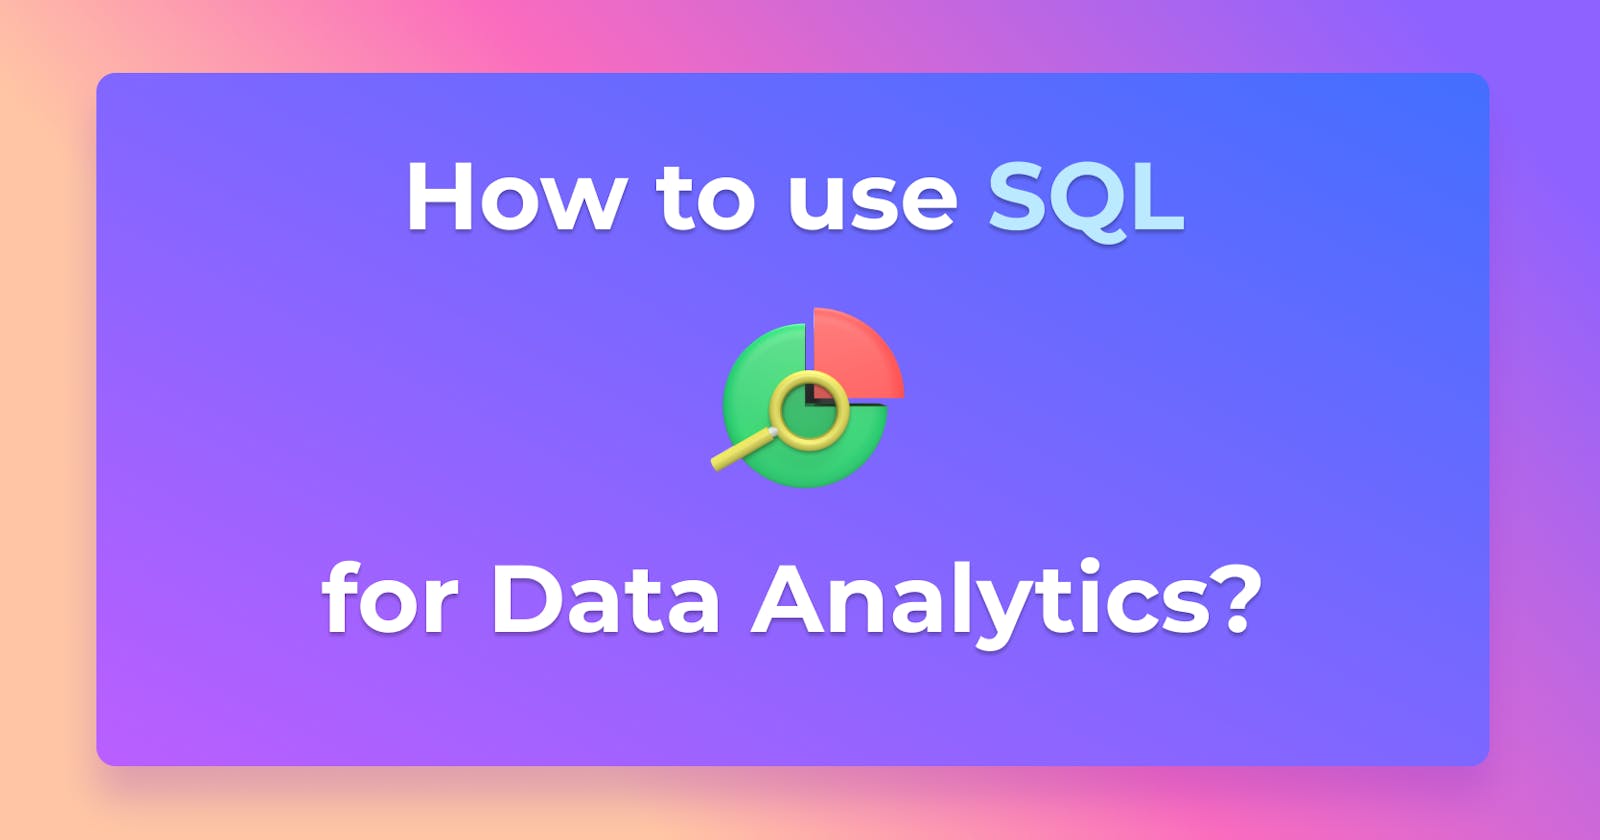 How to Use SQL to Analyze And Visualize Data?